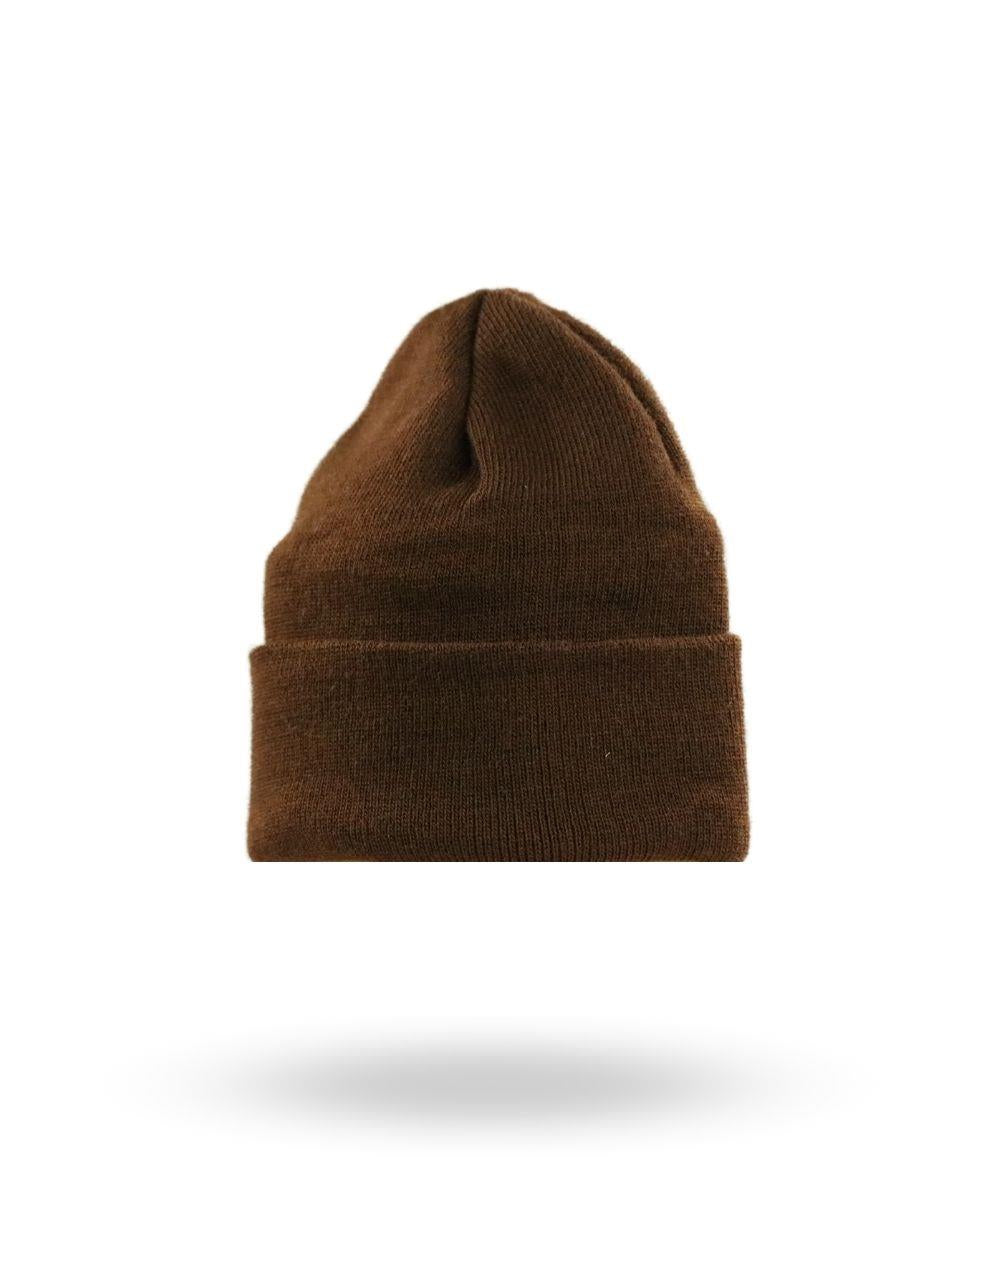 Basic Folded Daily Beret Brown - STREETMODE ™